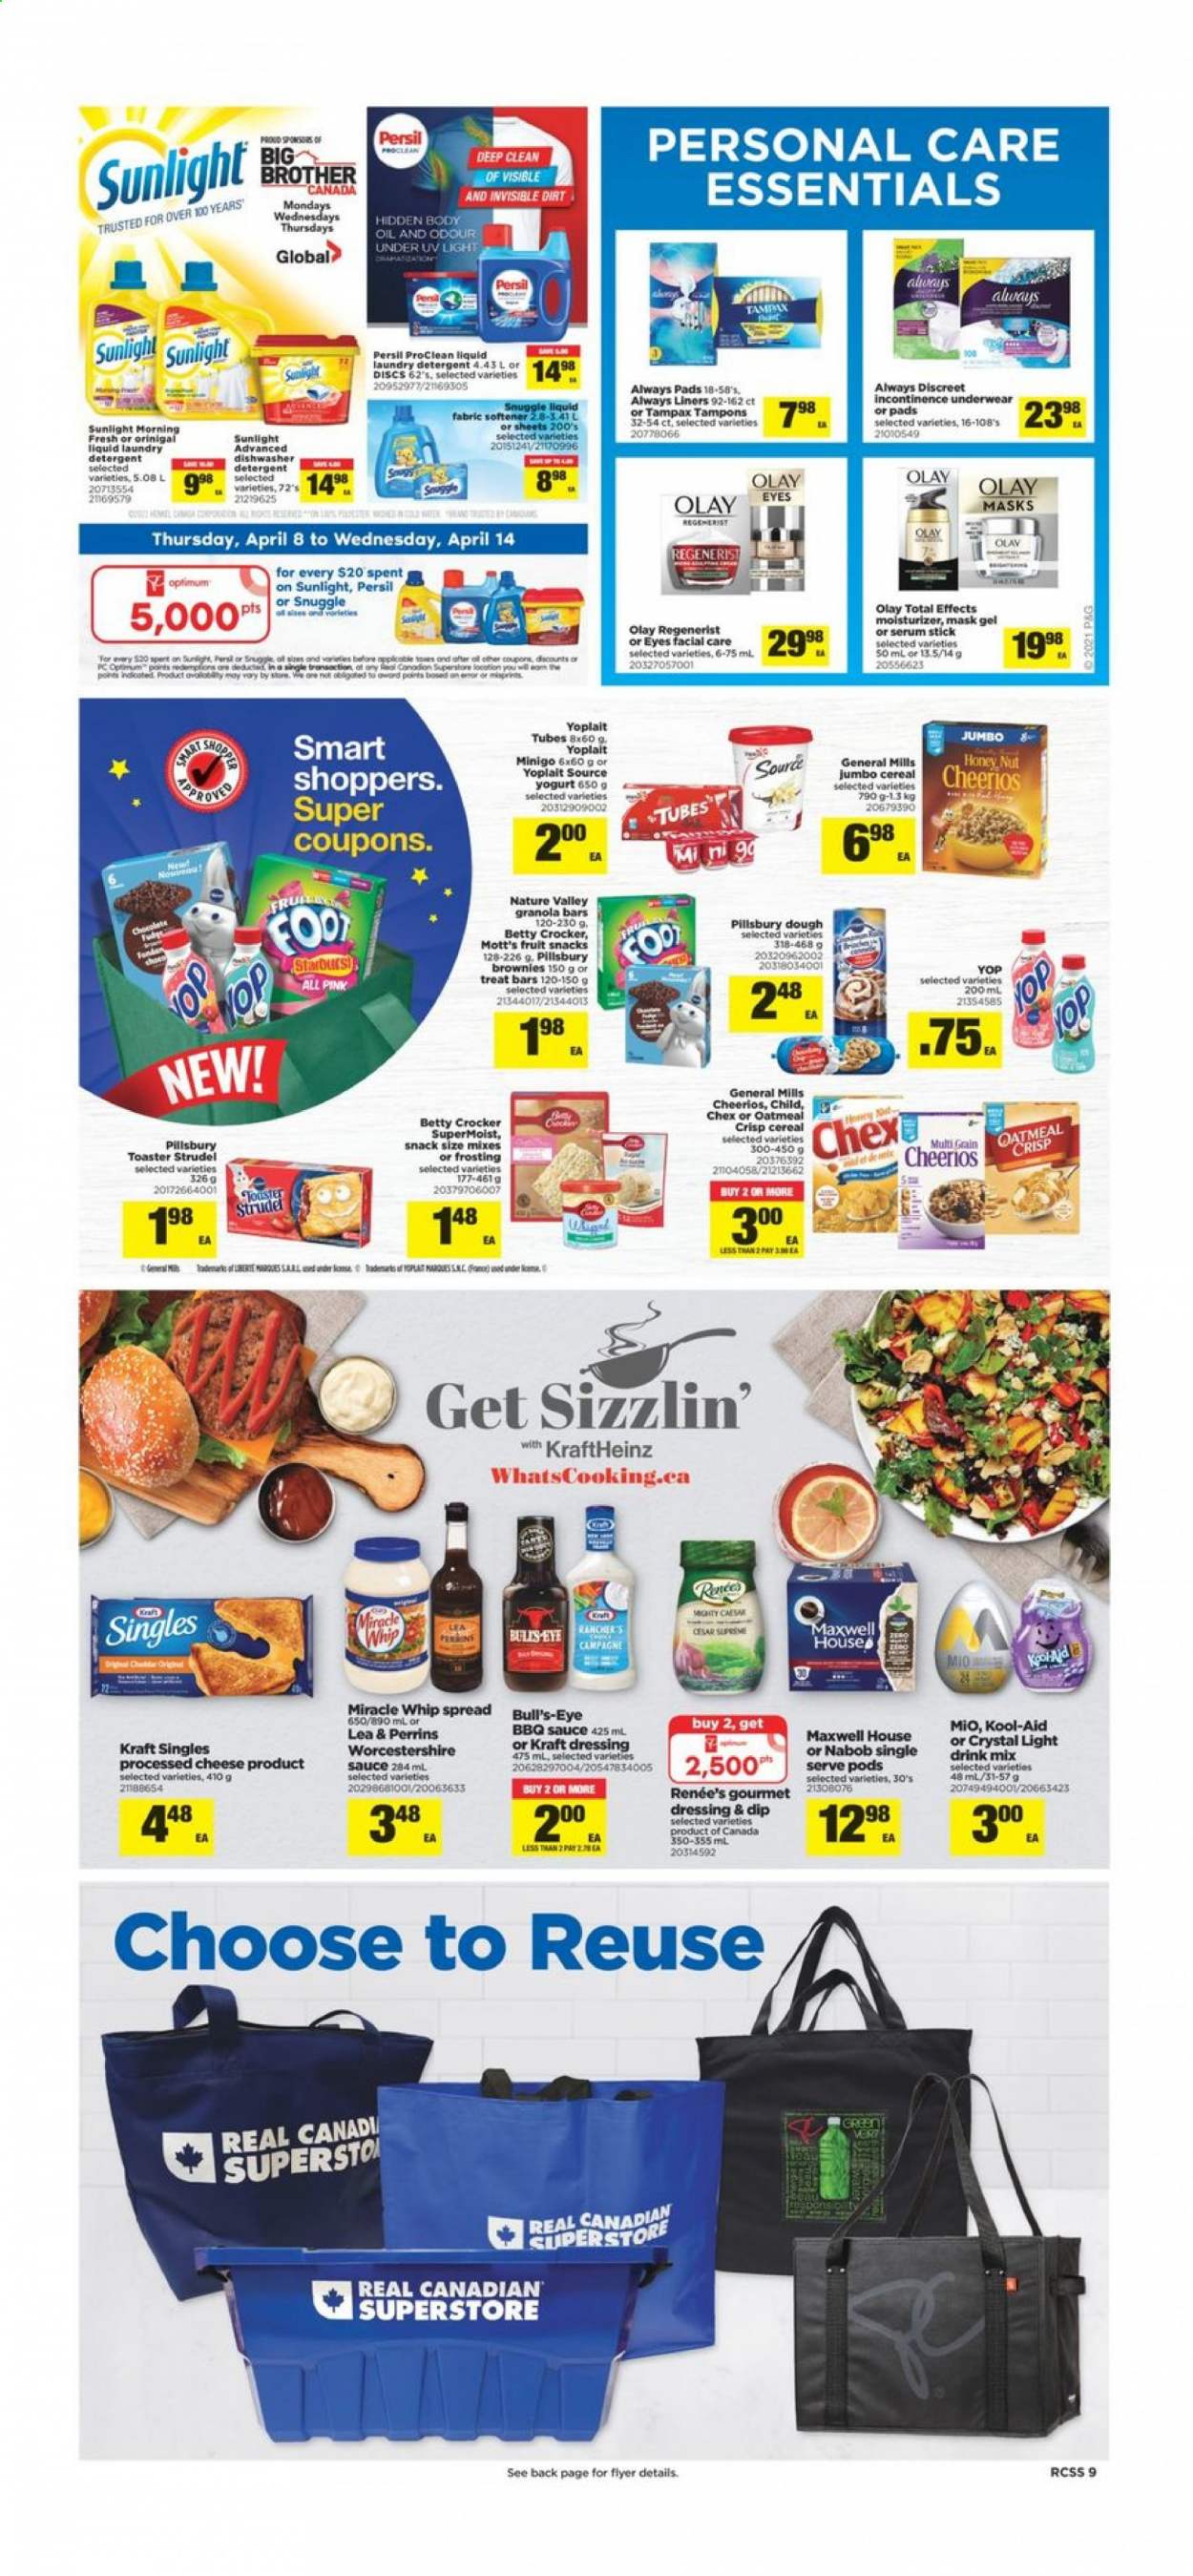 thumbnail - Real Canadian Superstore Flyer - April 08, 2021 - April 14, 2021 - Sales products - strudel, brownies, Mott's, sauce, Pillsbury, Kraft®, sandwich slices, Kraft Singles, yoghurt, Yoplait, Miracle Whip, dip, fudge, fruit snack, Starburst, frosting, oatmeal, oats, cereals, Cheerios, granola bar, Nature Valley, BBQ sauce, worcestershire sauce, dressing, Maxwell House, Always liners, Snuggle, Persil, fabric softener, laundry detergent, Sunlight, Always pads, Always Discreet, incontinence underwear, tampons, moisturizer, serum, Olay, body oil, Optimum, Tampax. Page 9.